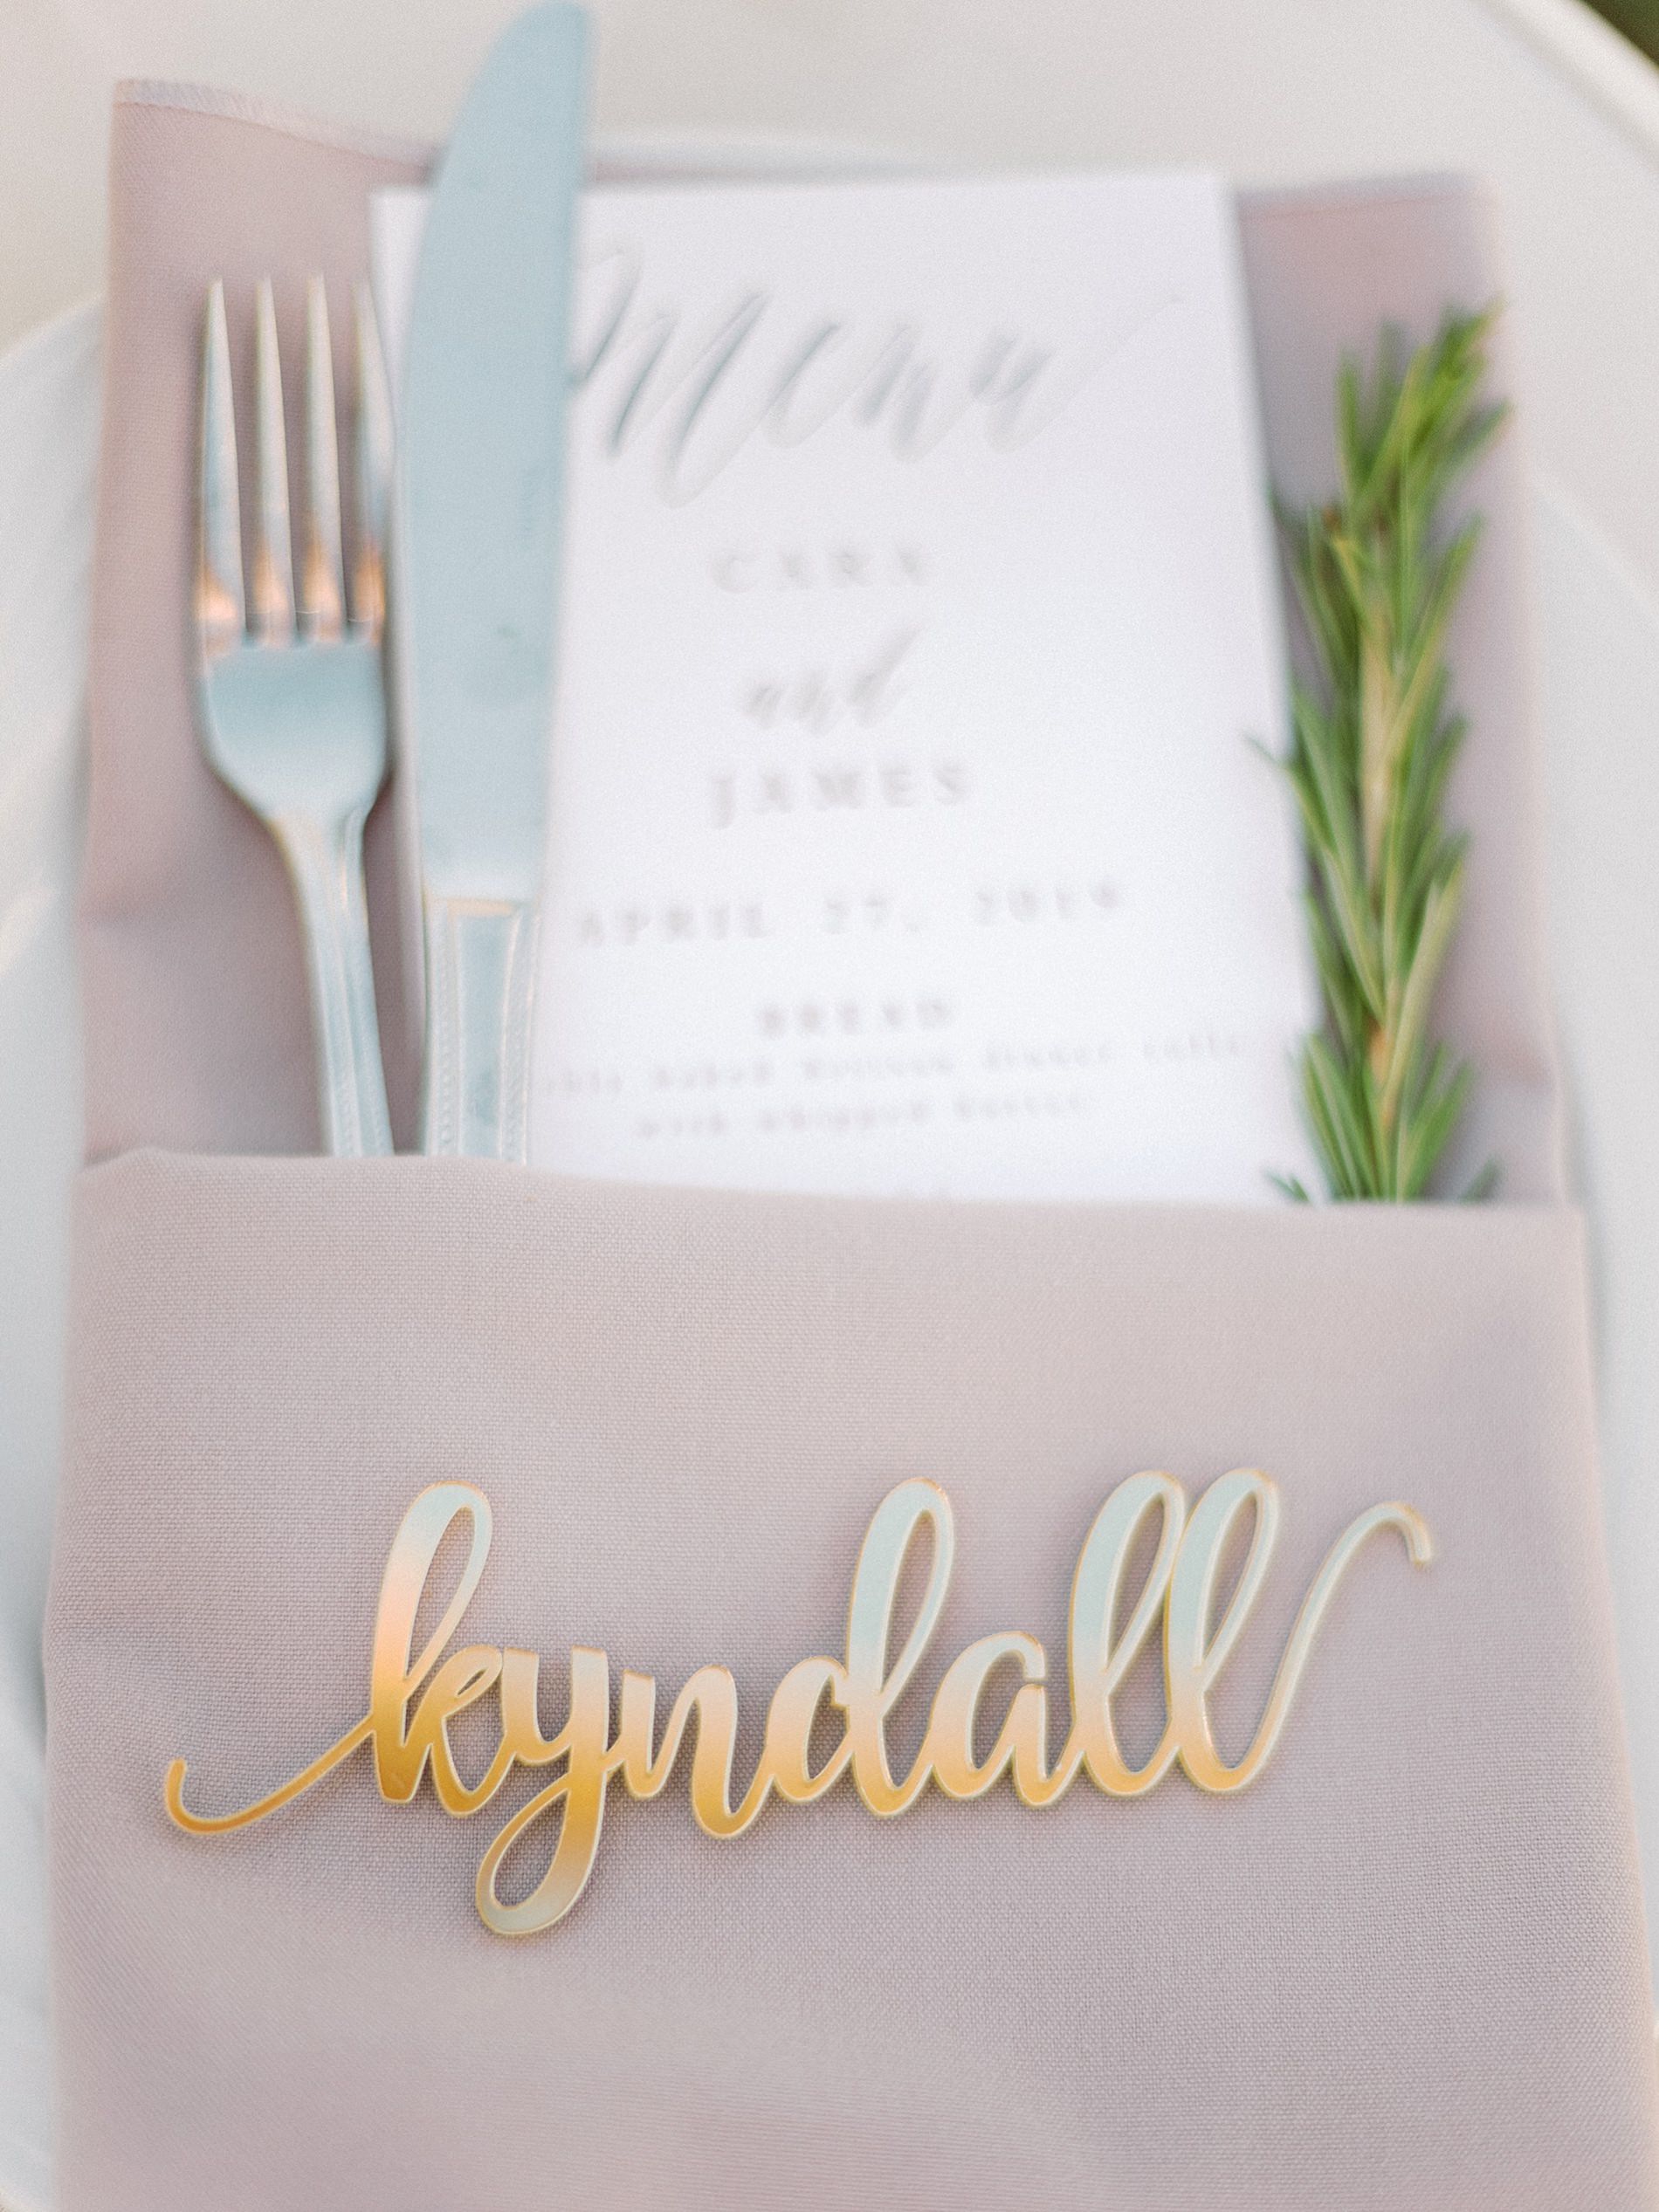 INSTAGRAM Blush Pink Linen with Rosemary and Menu Card, Laser Cut Gold Acrylic Name